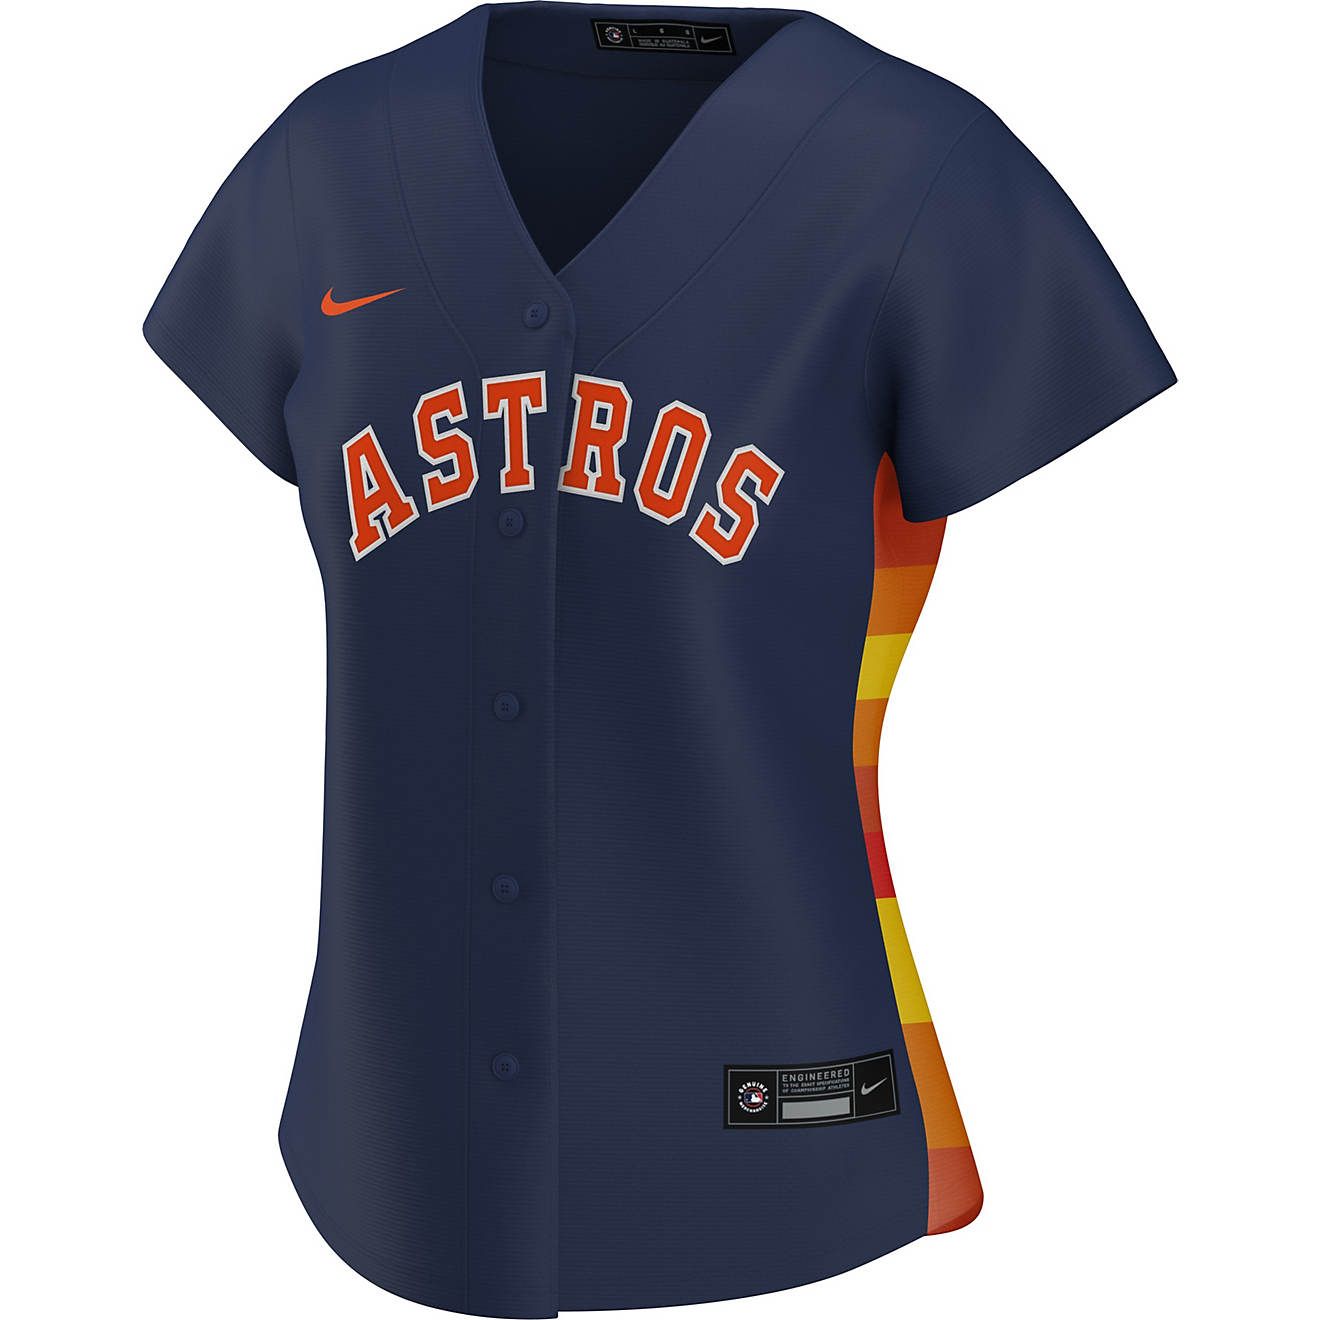 Nike Women's Houston Astros Official Replica Jersey | Academy Sports + Outdoor Affiliate